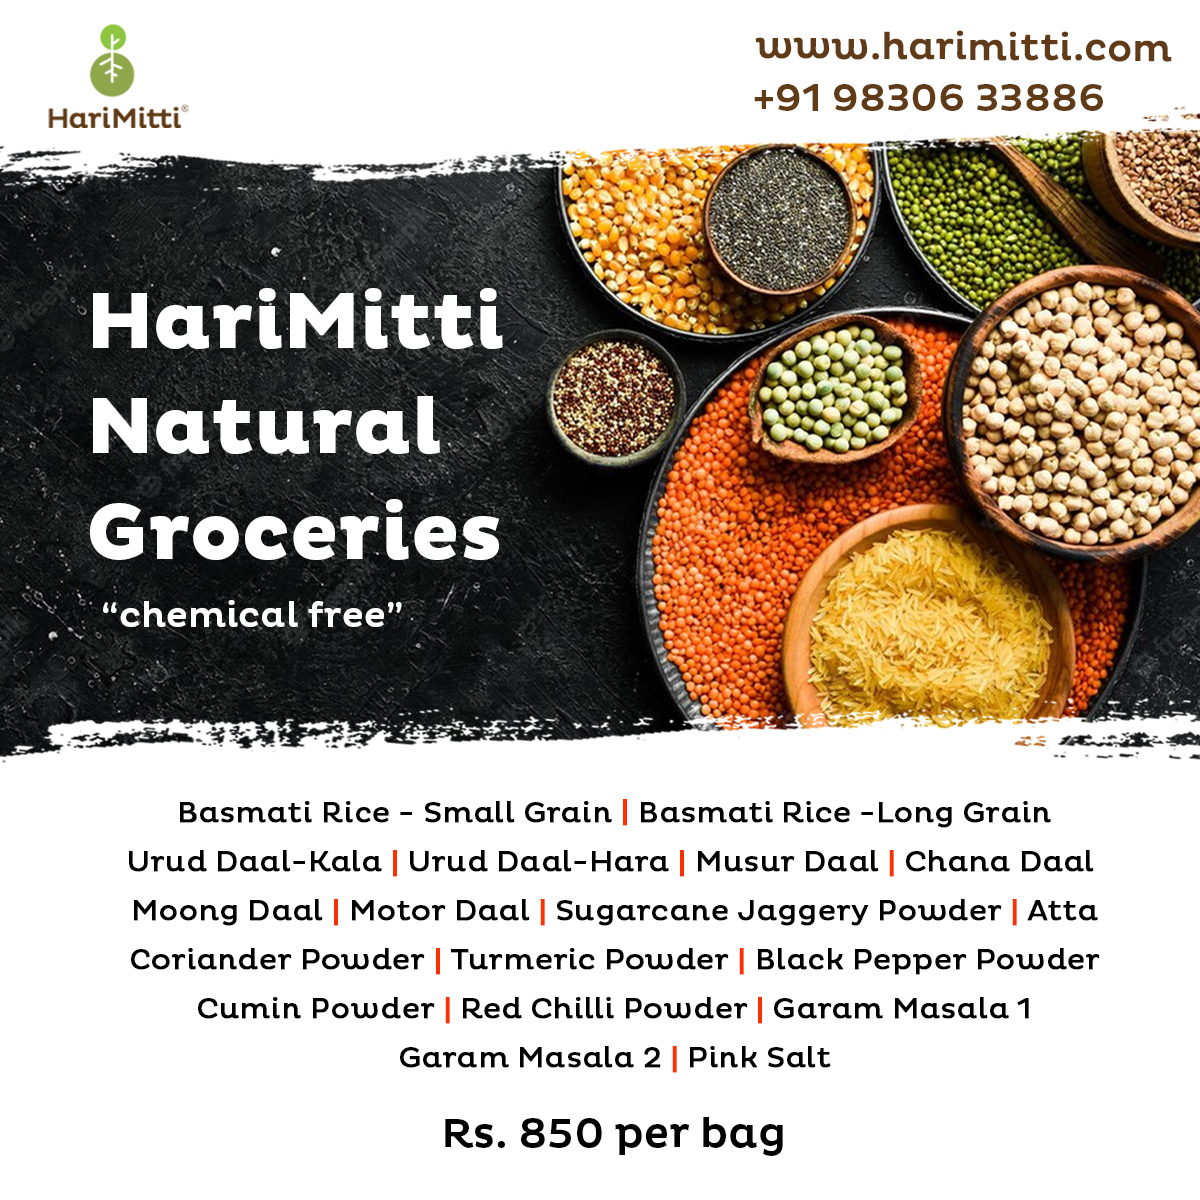 How is it possible to be healthy and eco-friendly at the same time? 
We’ve got you covered with our grocery store, #harmitti. 

#harimitti #harimittifoundation #directfromfarm #groceries #indiangrocery #organicspices #purity #spicesreal #kolkataspices #grocerydistributor #market